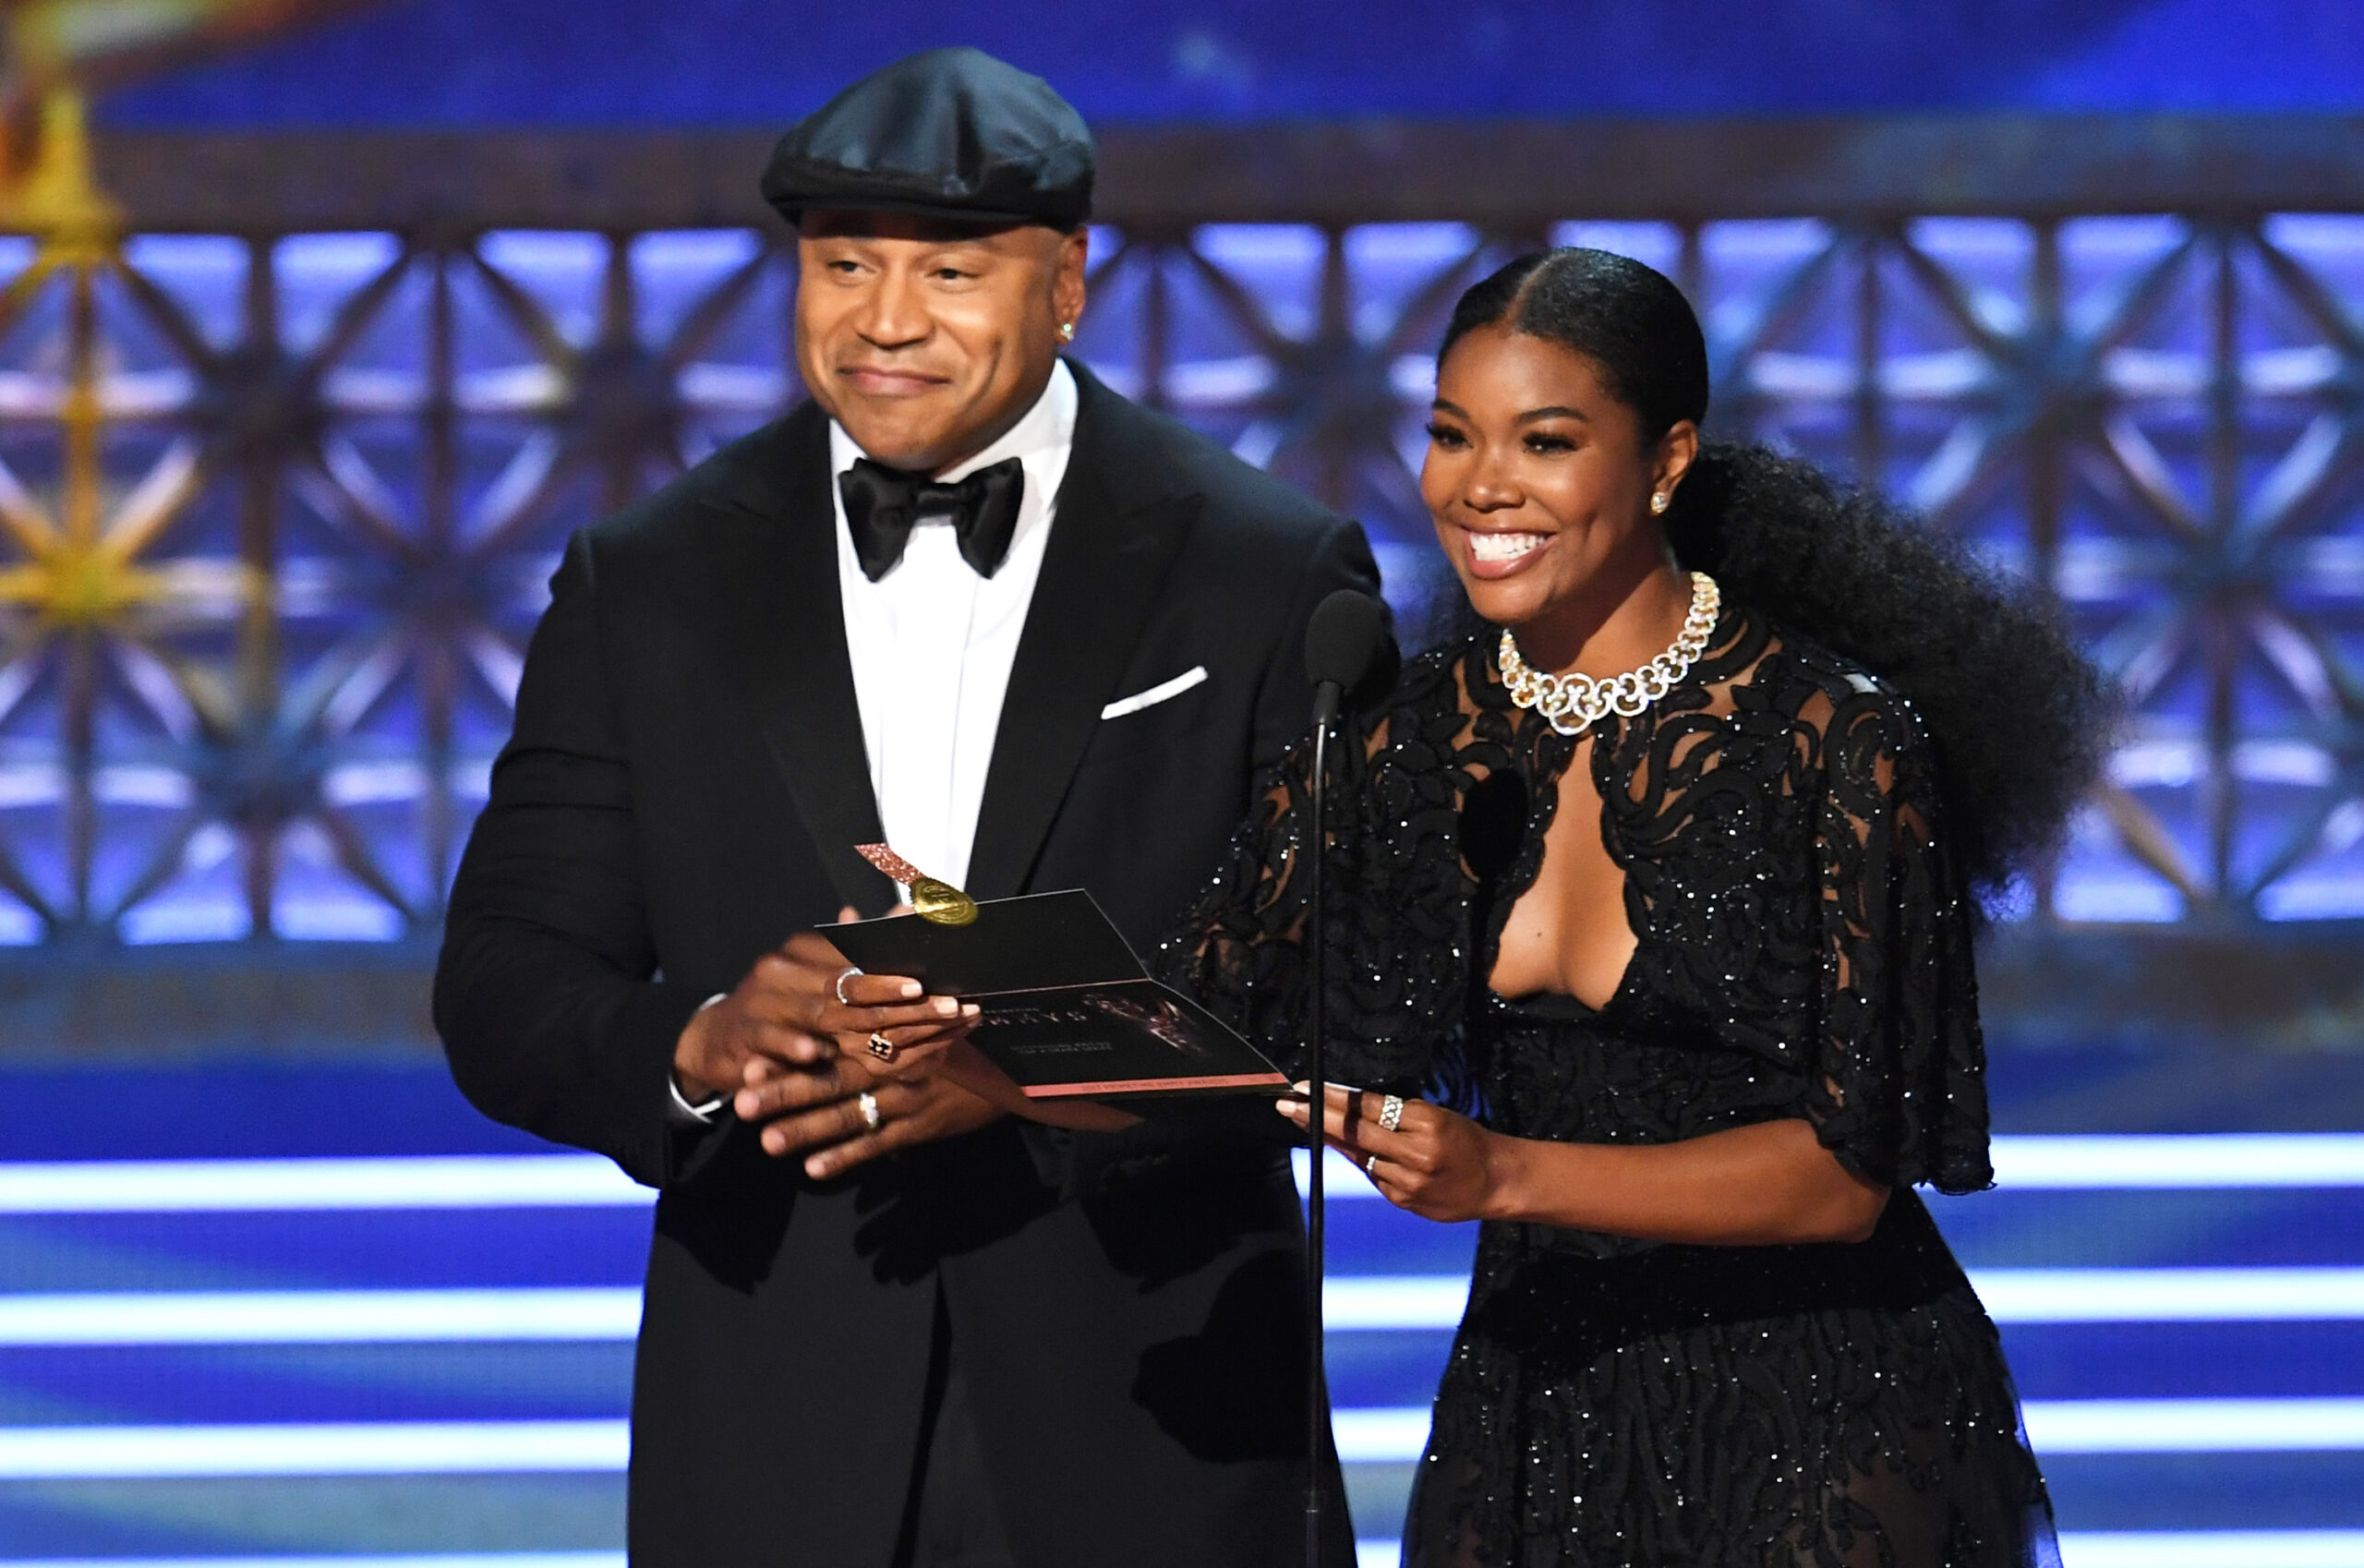 Gabrielle Union Shares Throwback Photos with LL Cool J for Their Film 'Deliver Us From Eva'